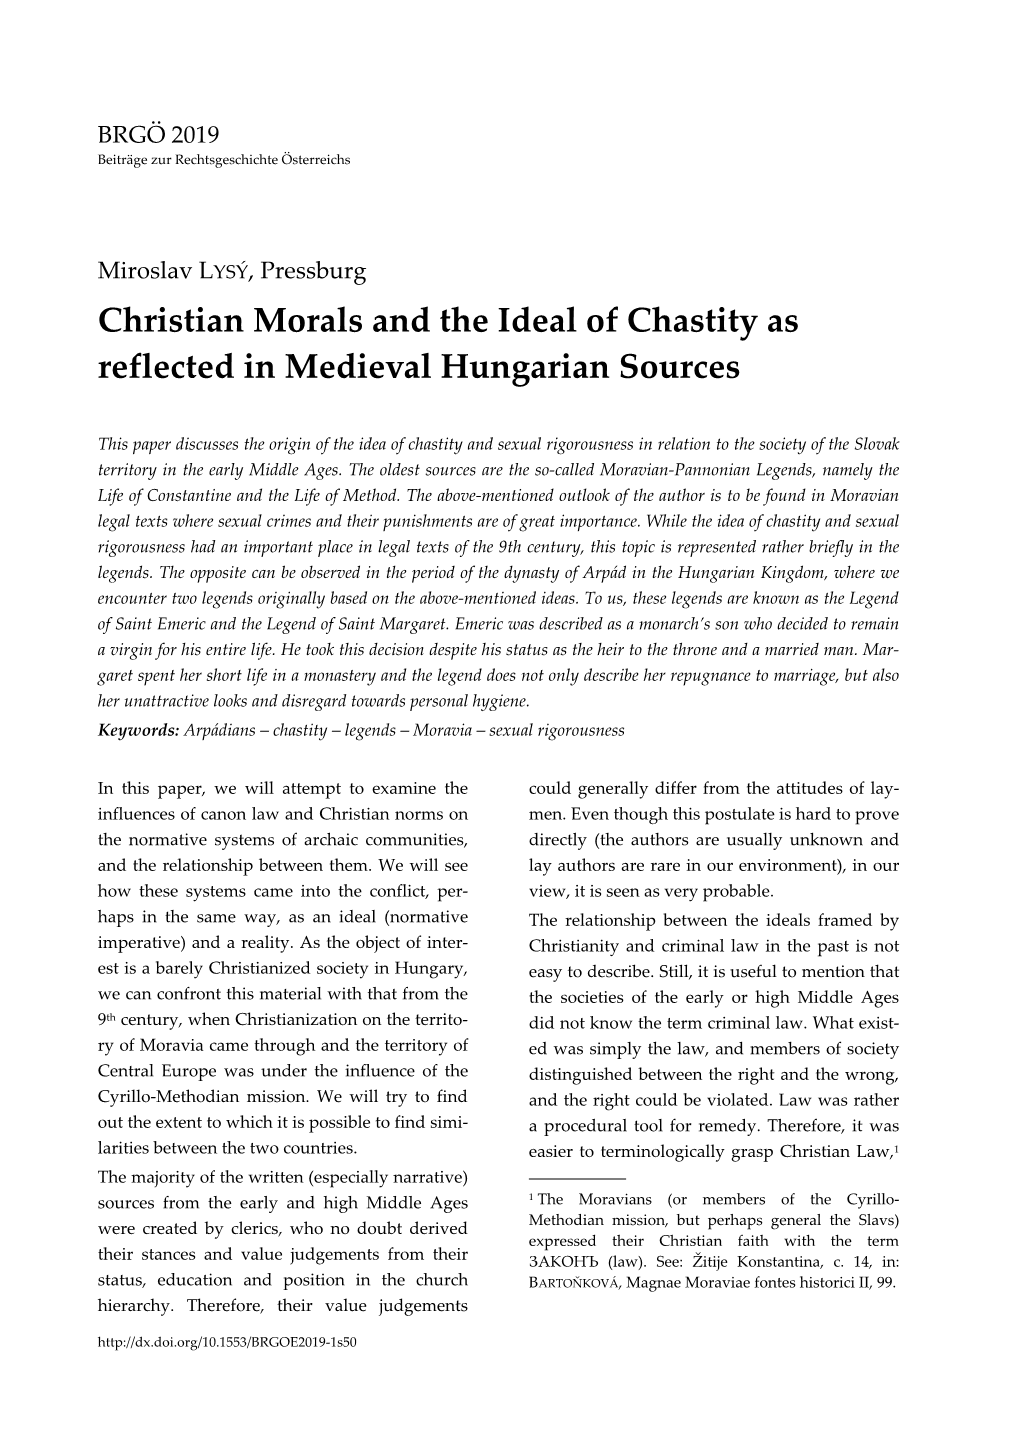 Christian Morals and the Ideal of Chastity As Reflected in Medieval Hungarian Sources